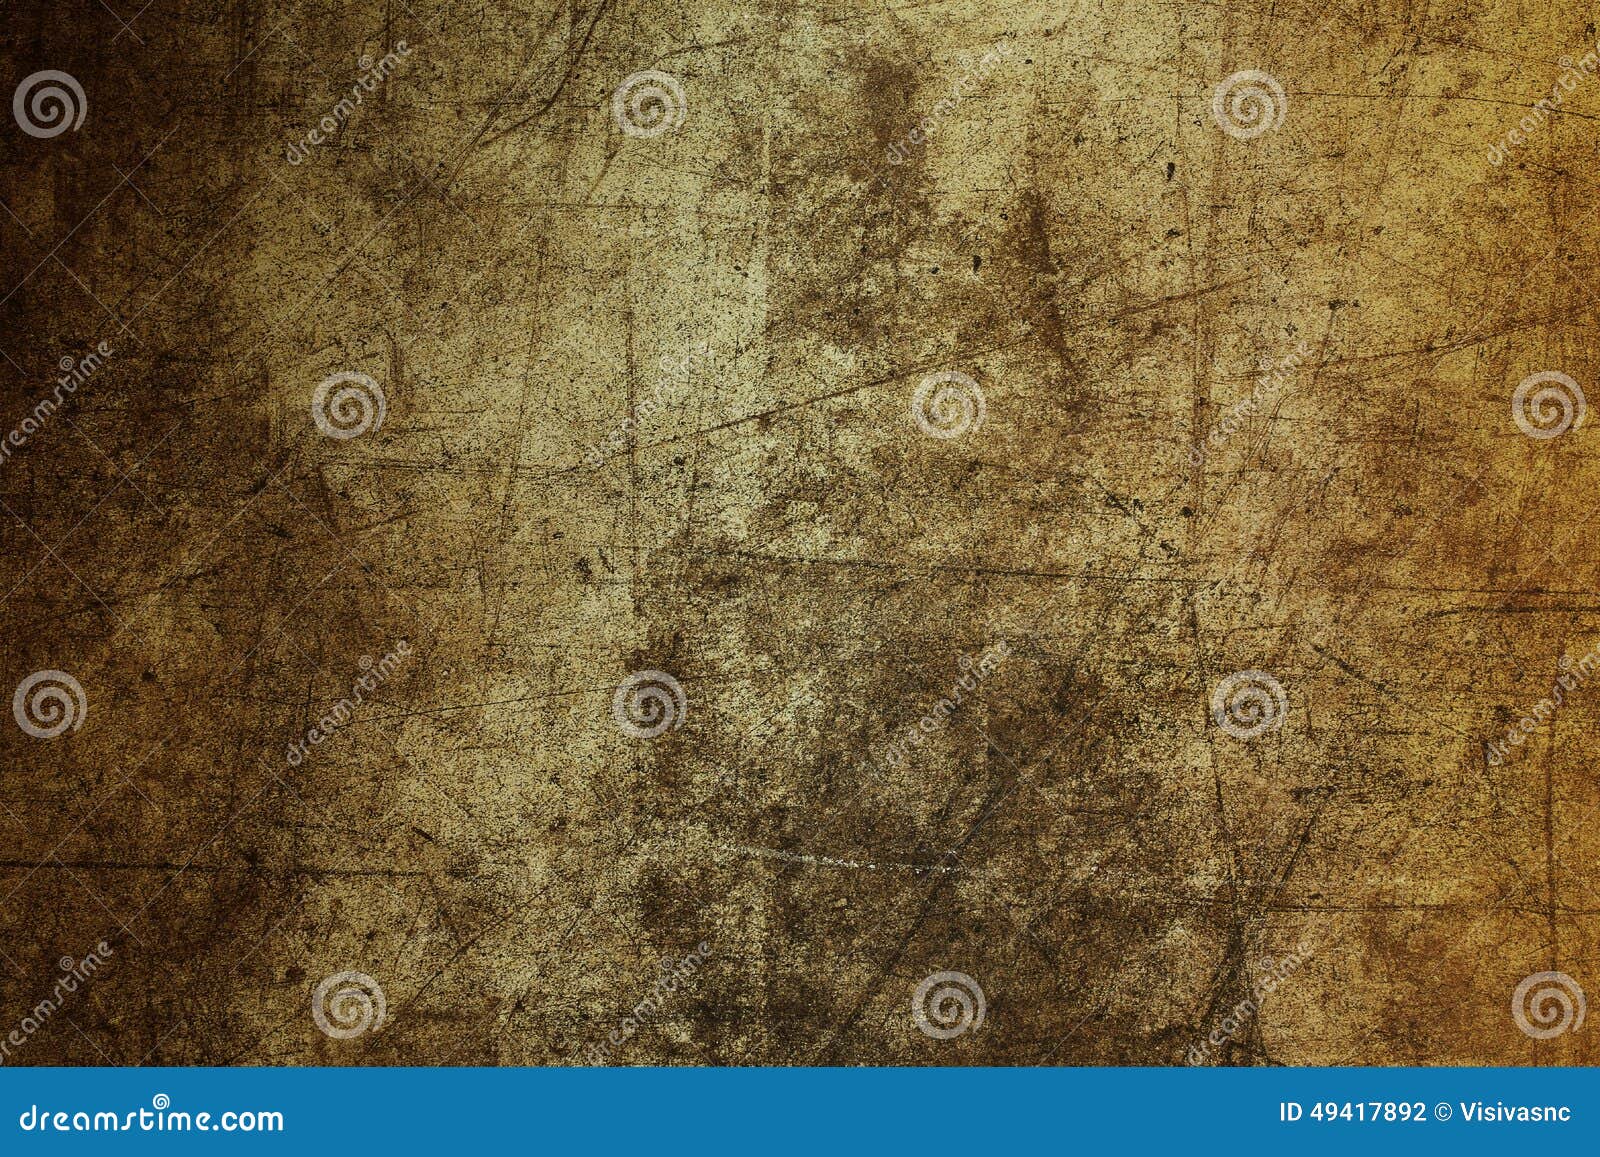 background brown wall texture abstract grunge ruined scratched